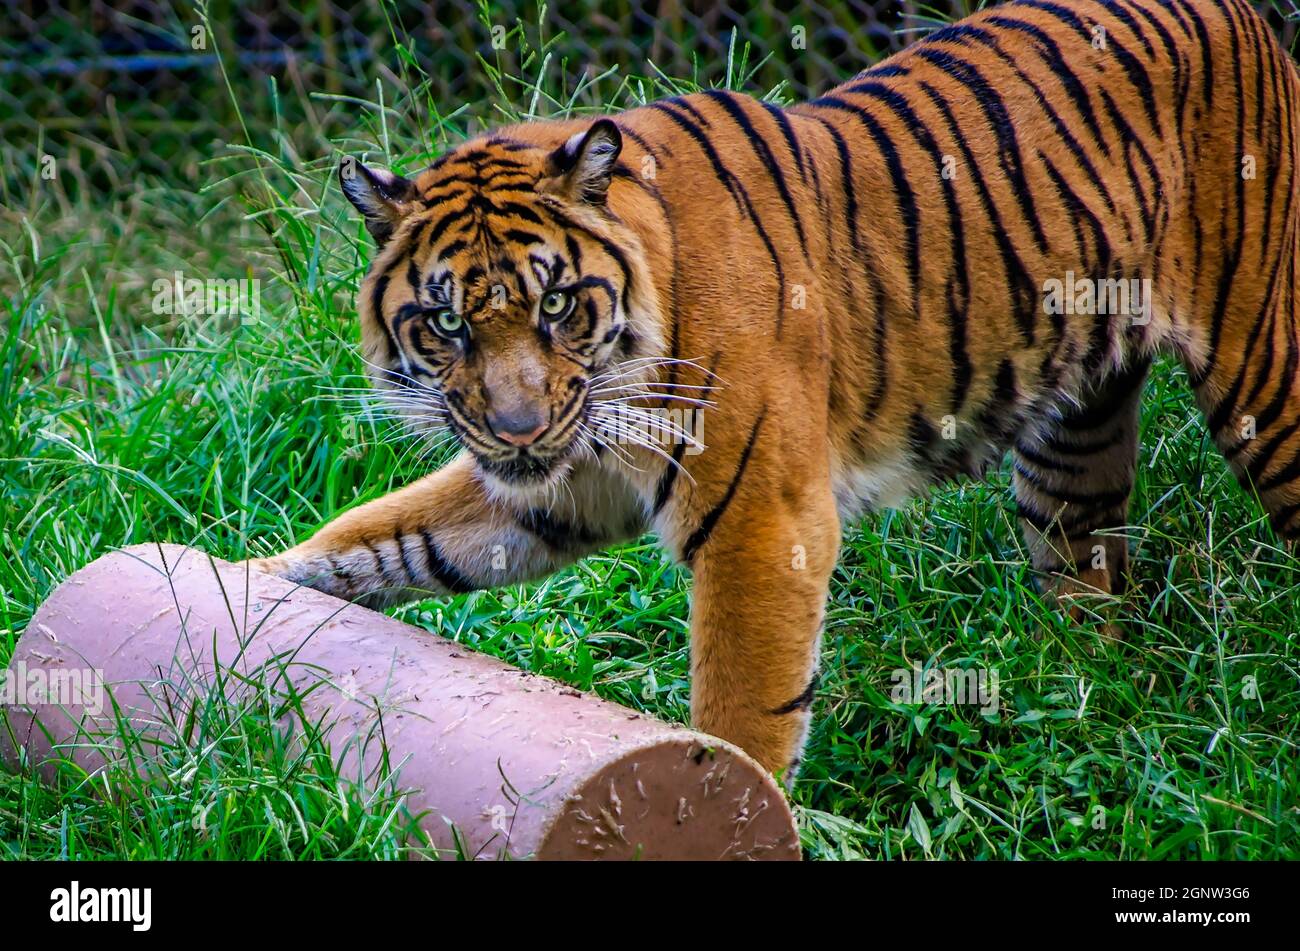 A Sumatran tiger (Panthera tigris sumatrae) plays with an enrichment toy at the Memphis Zoo, Sept. 8, 2015, in Memphis, Tennessee. Stock Photo